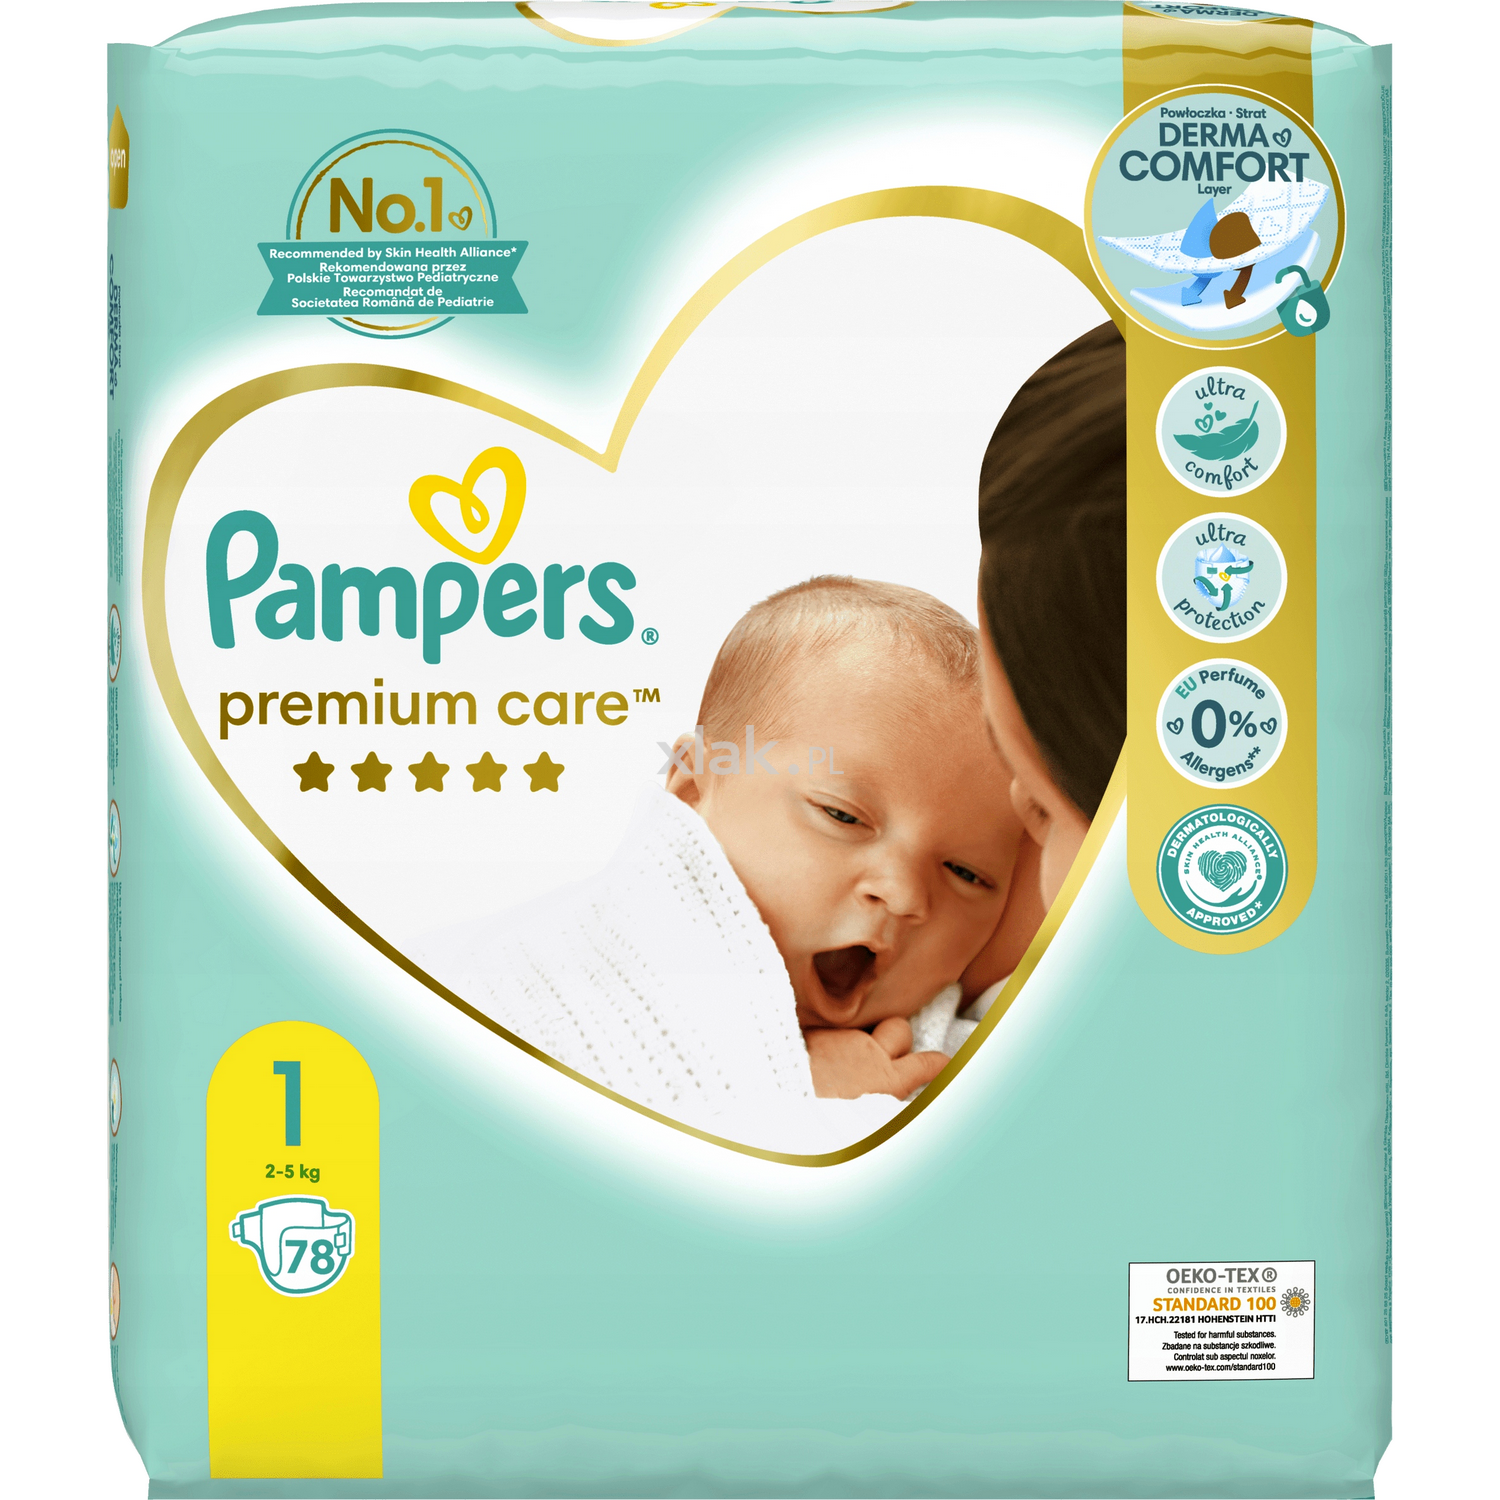 pampers active fit 4